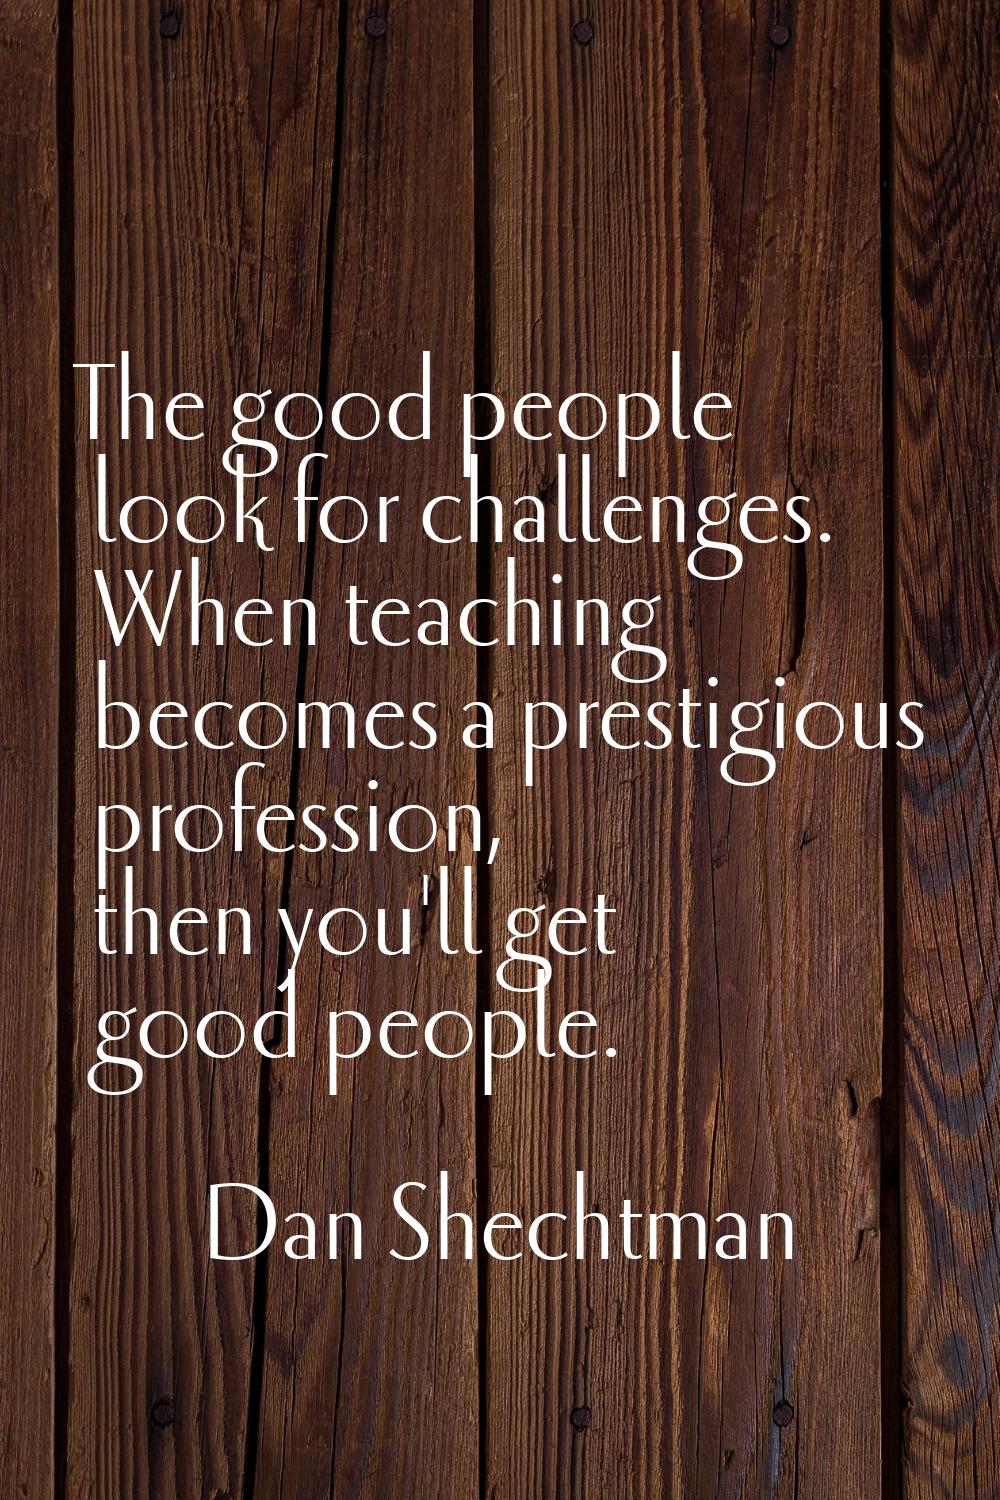 The good people look for challenges. When teaching becomes a prestigious profession, then you'll ge